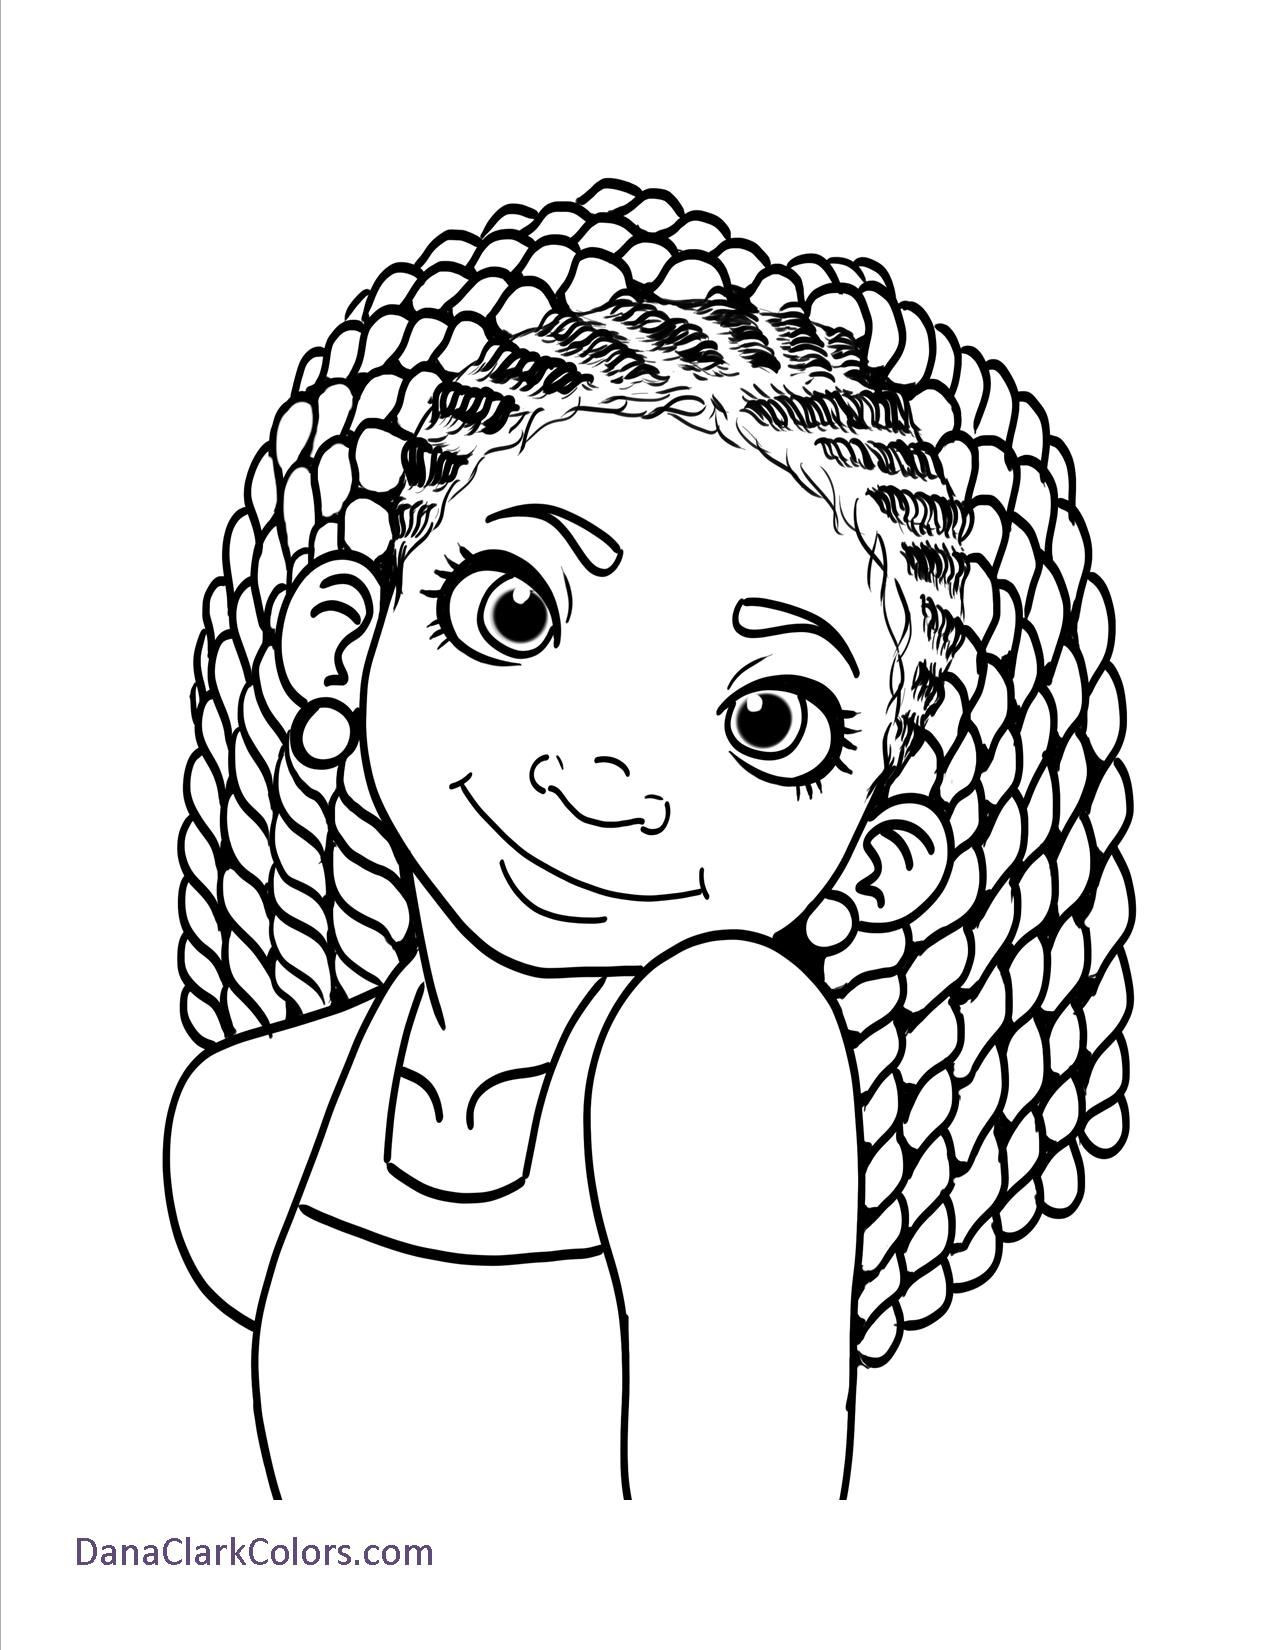 African American Boys Coloring Sheets
 Free Coloring Page 1 School